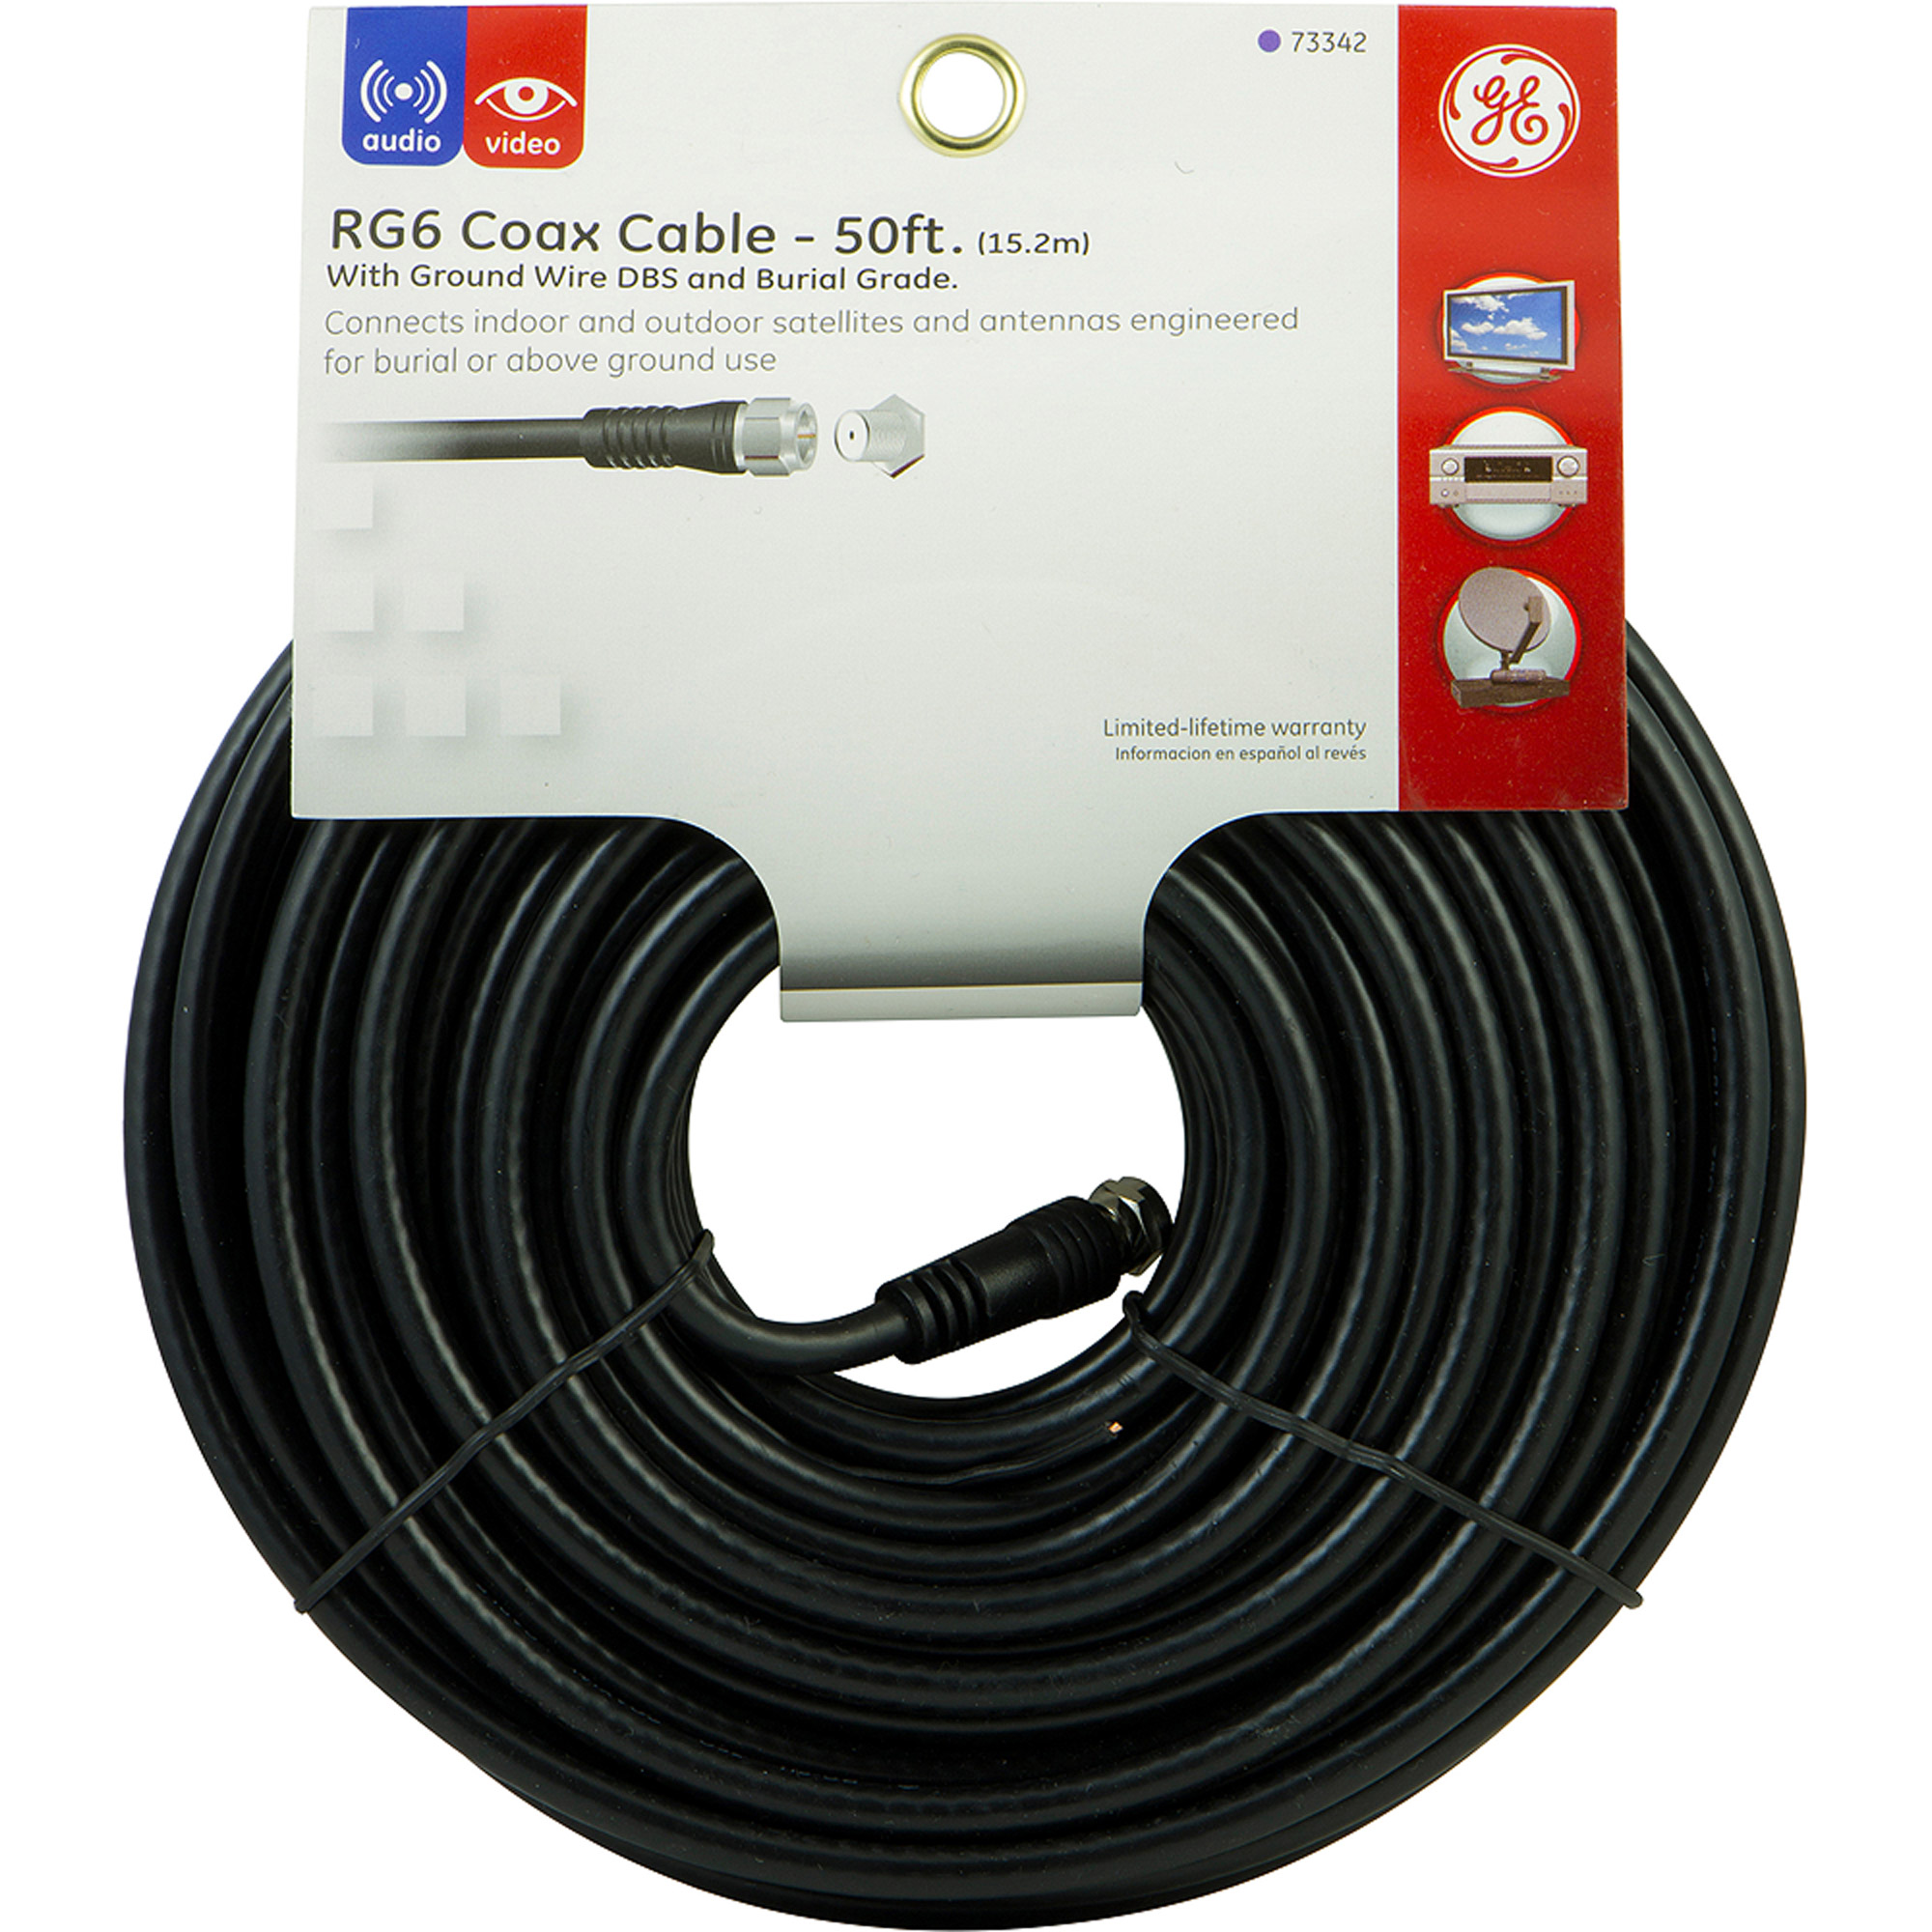 Ge Burial Grade Rg6 Coax Cable With Grou - image 1 of 1